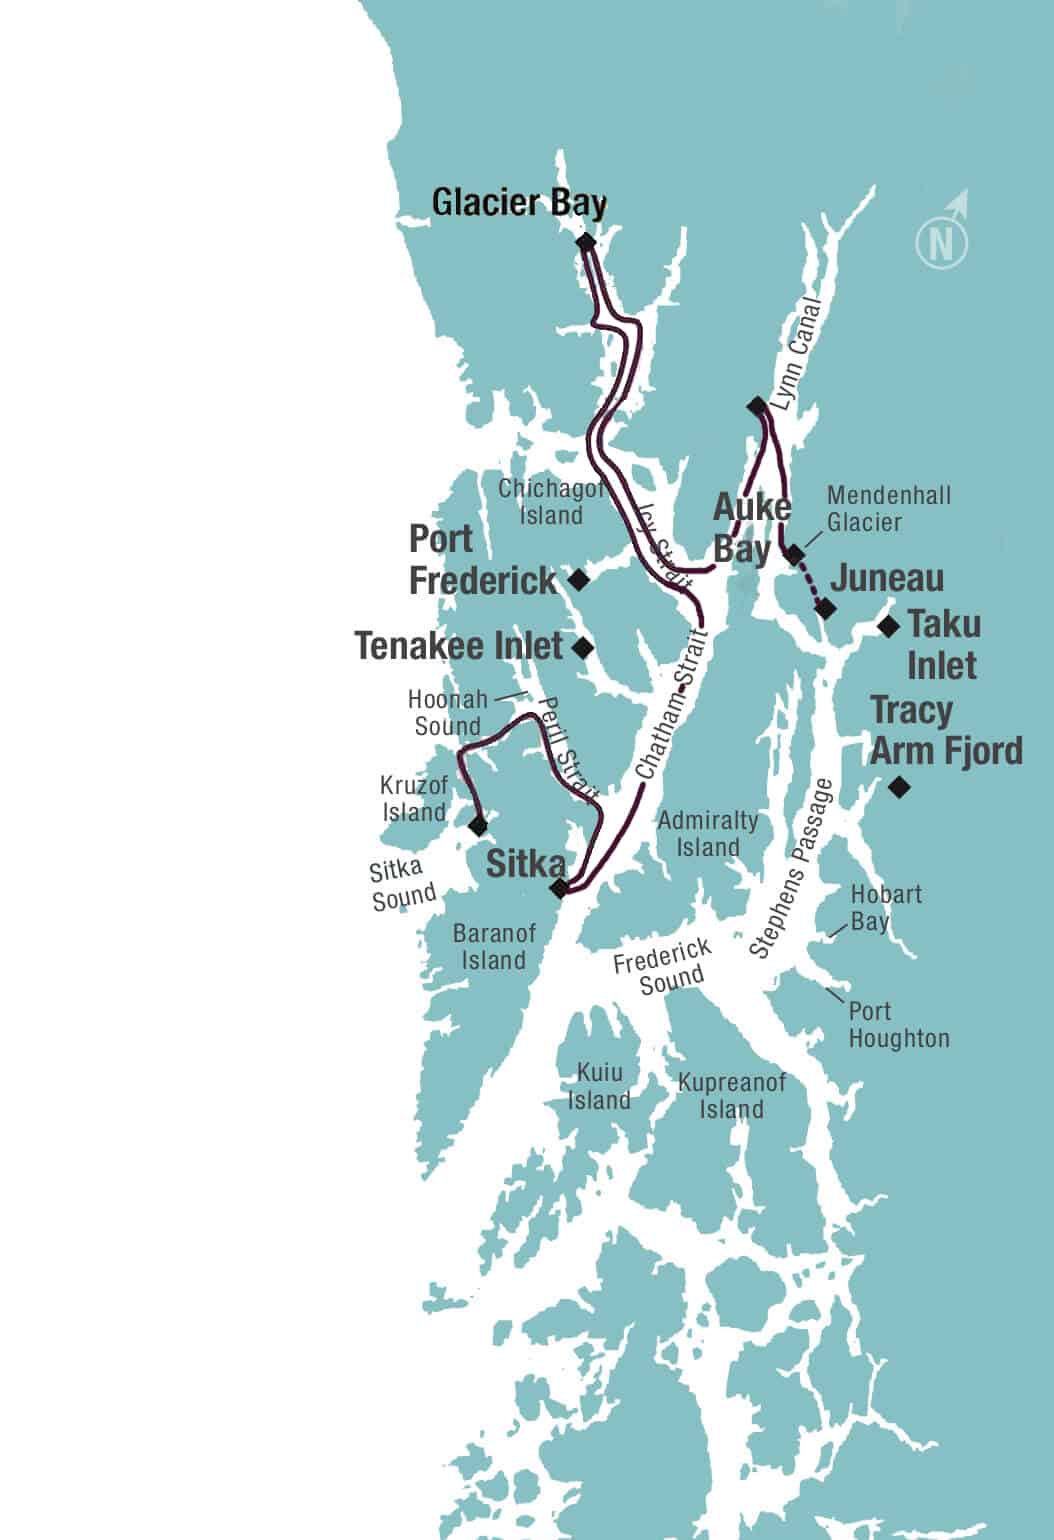 Route map of Alaska small ship cruise between Sitka & Juneau.